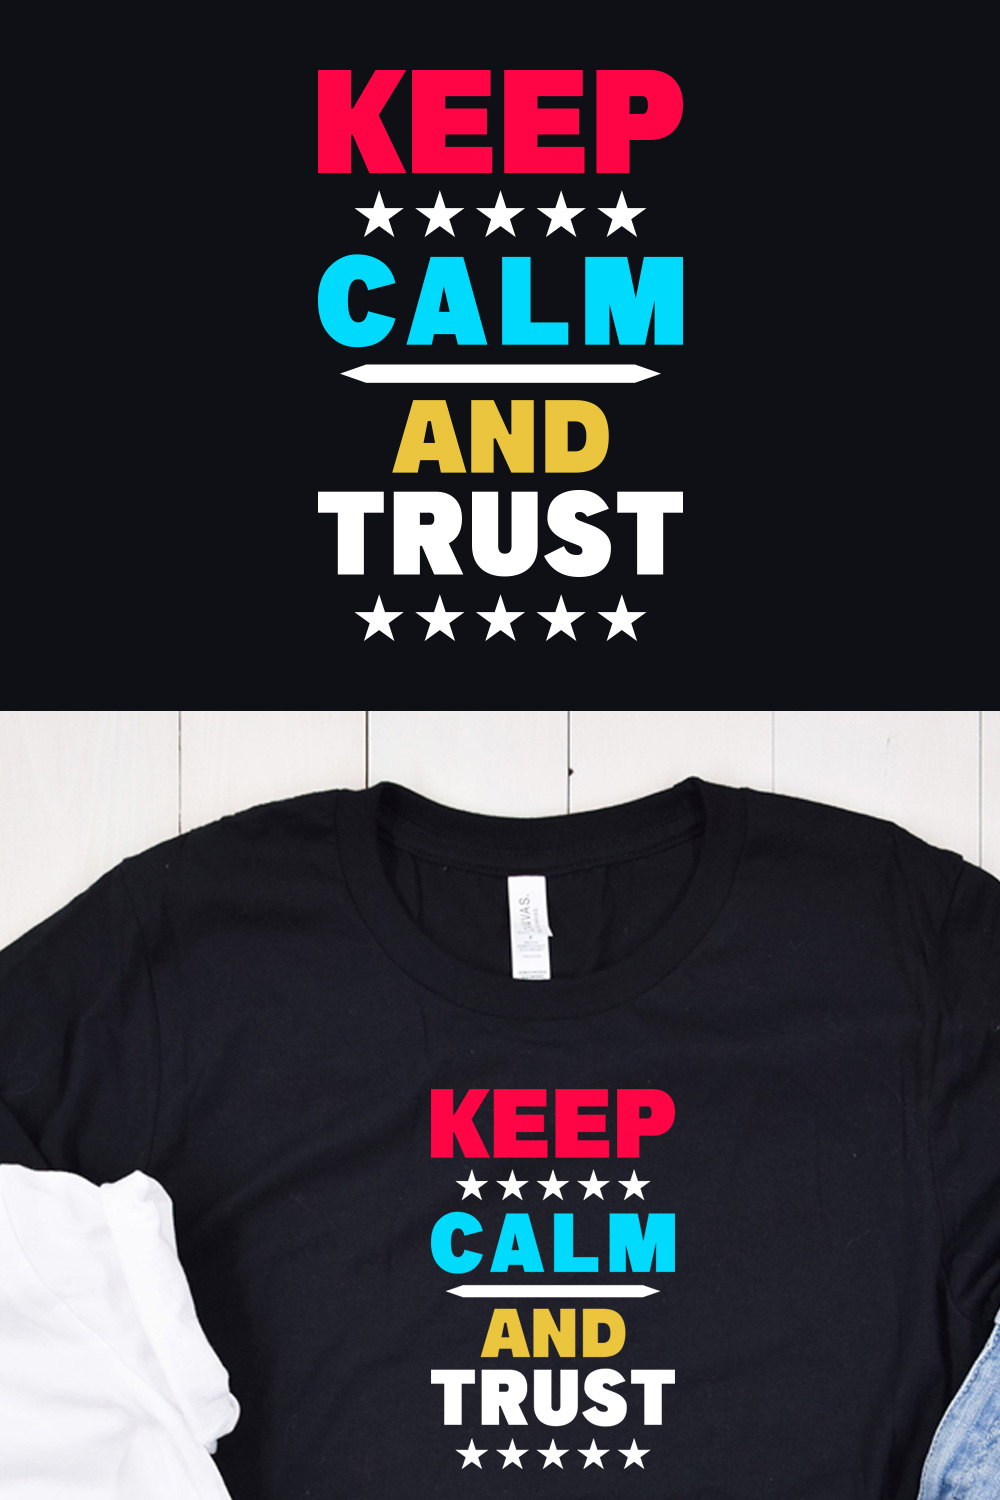 Keep Calm and Trust Typography T-Shirt Design pinterest image.